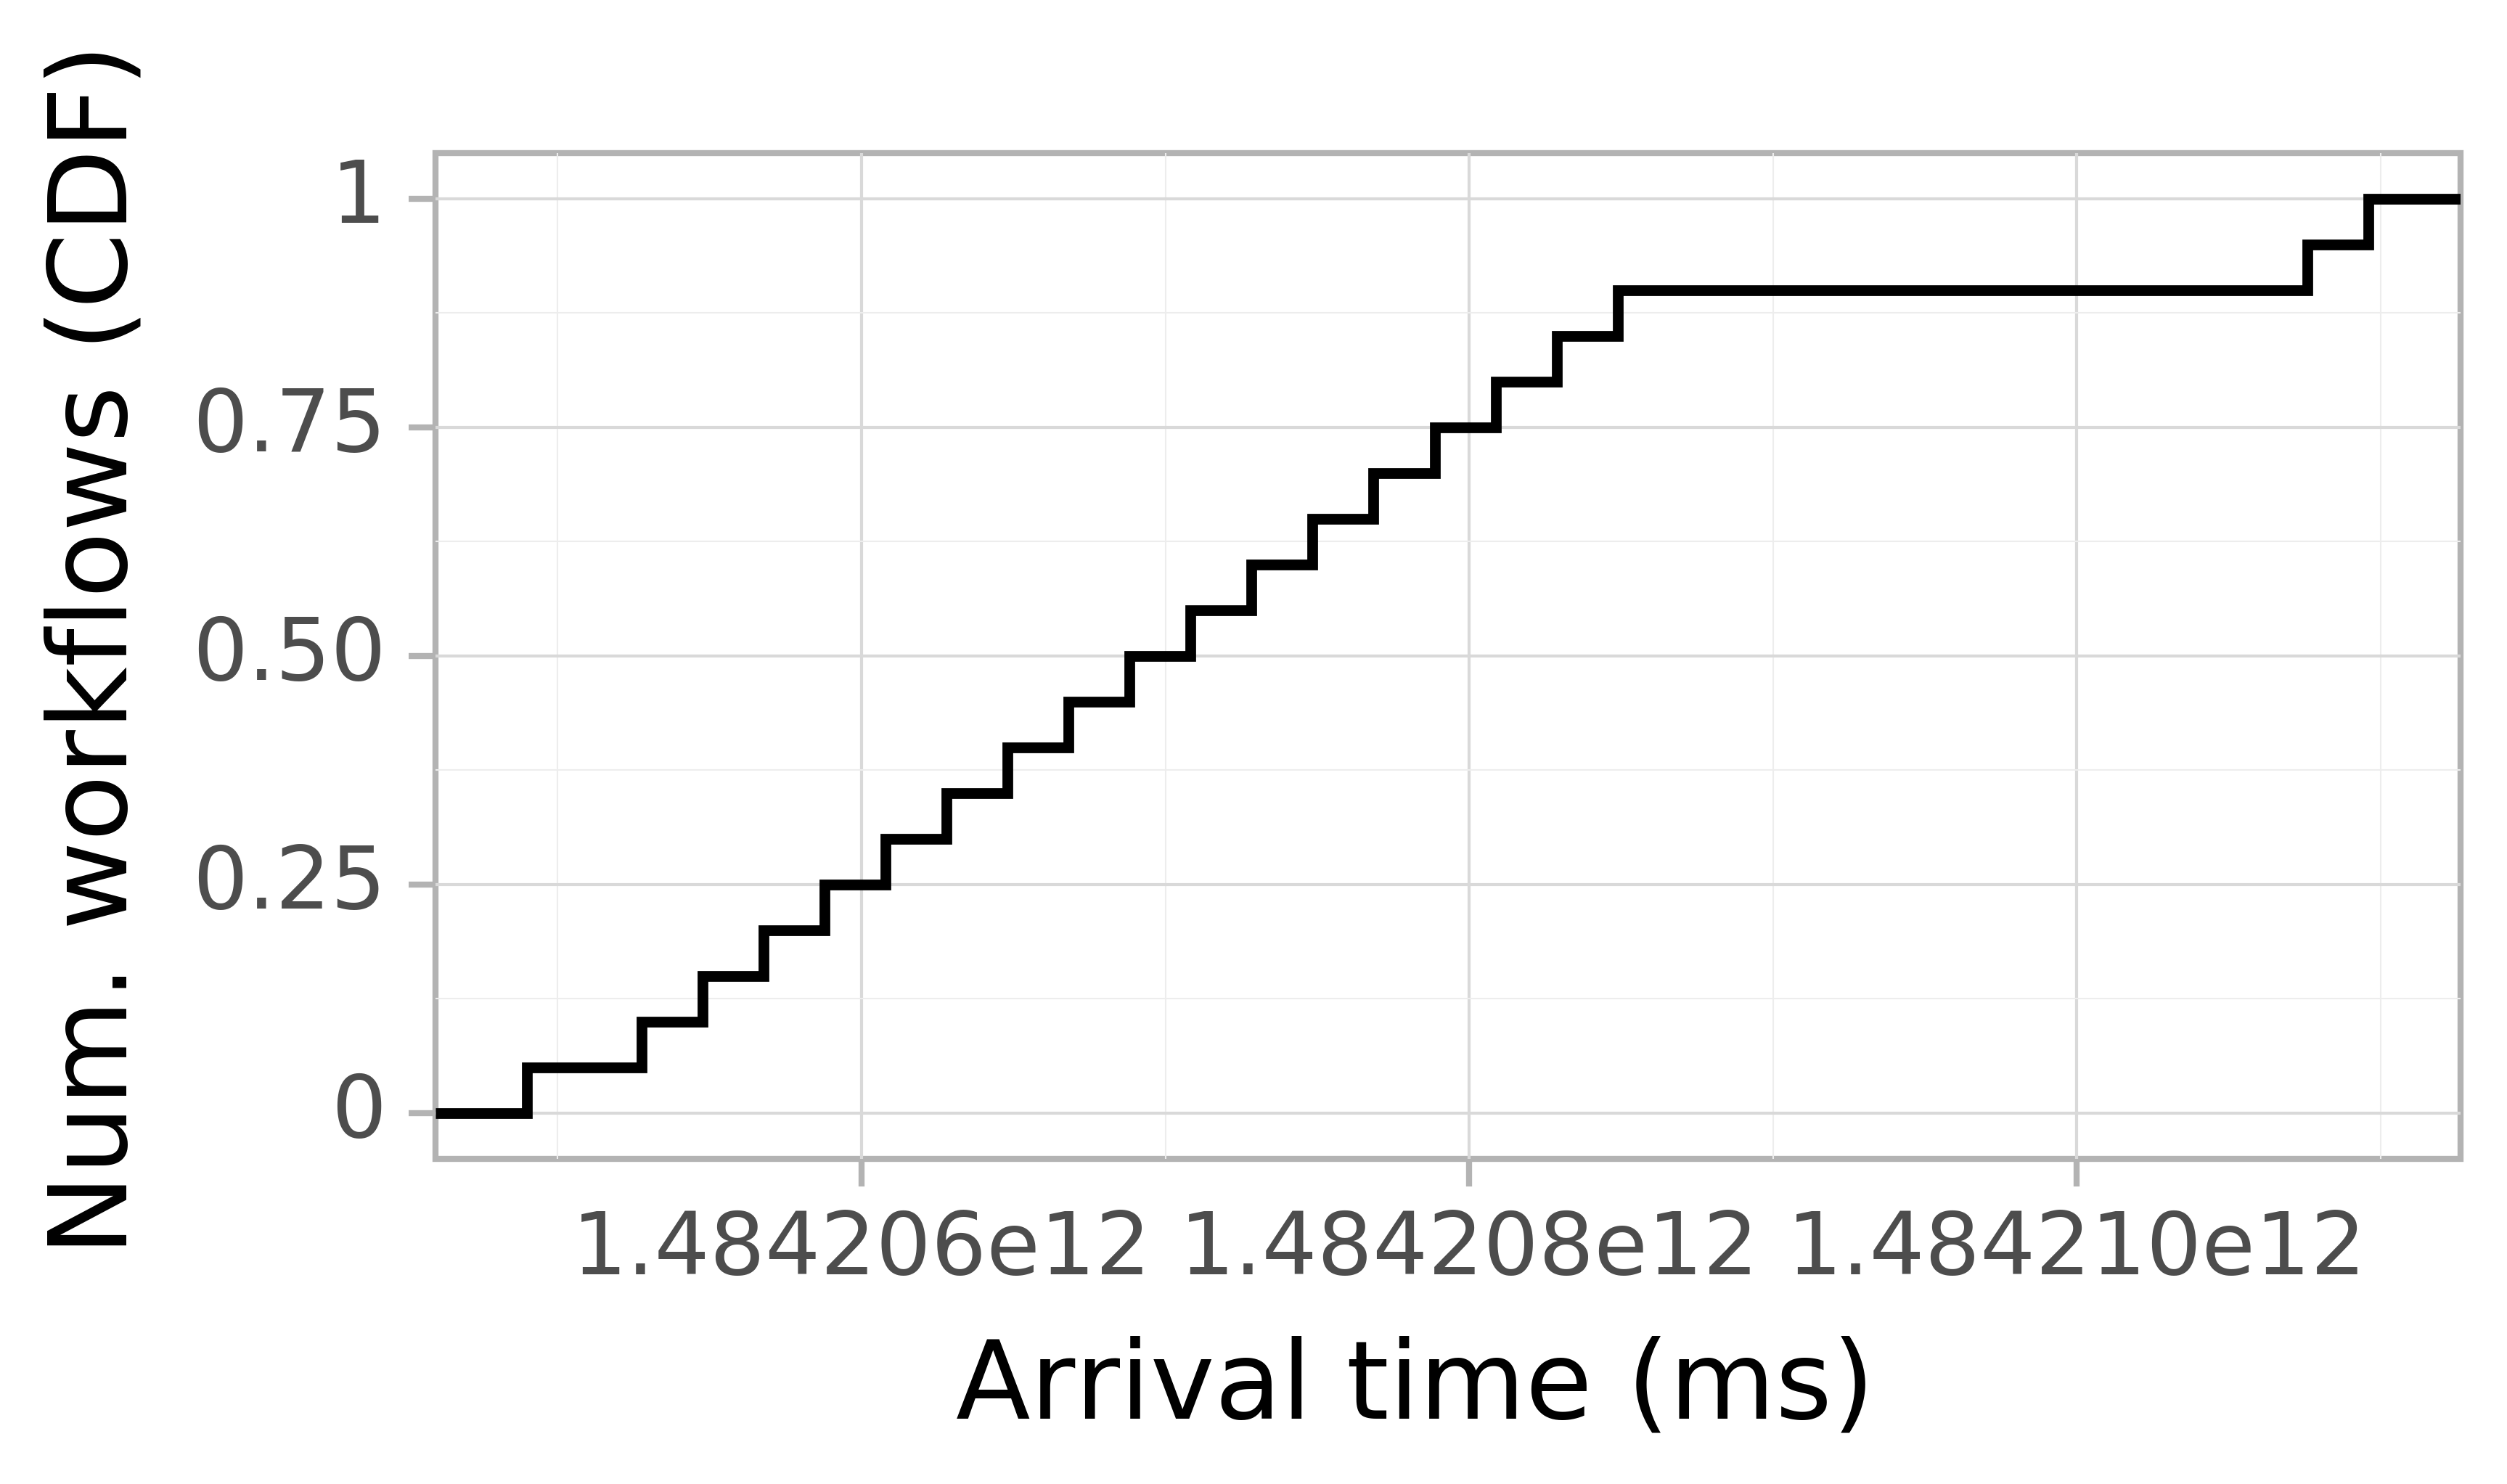 Job arrival CDF graph for the askalon-new_ee8 trace.